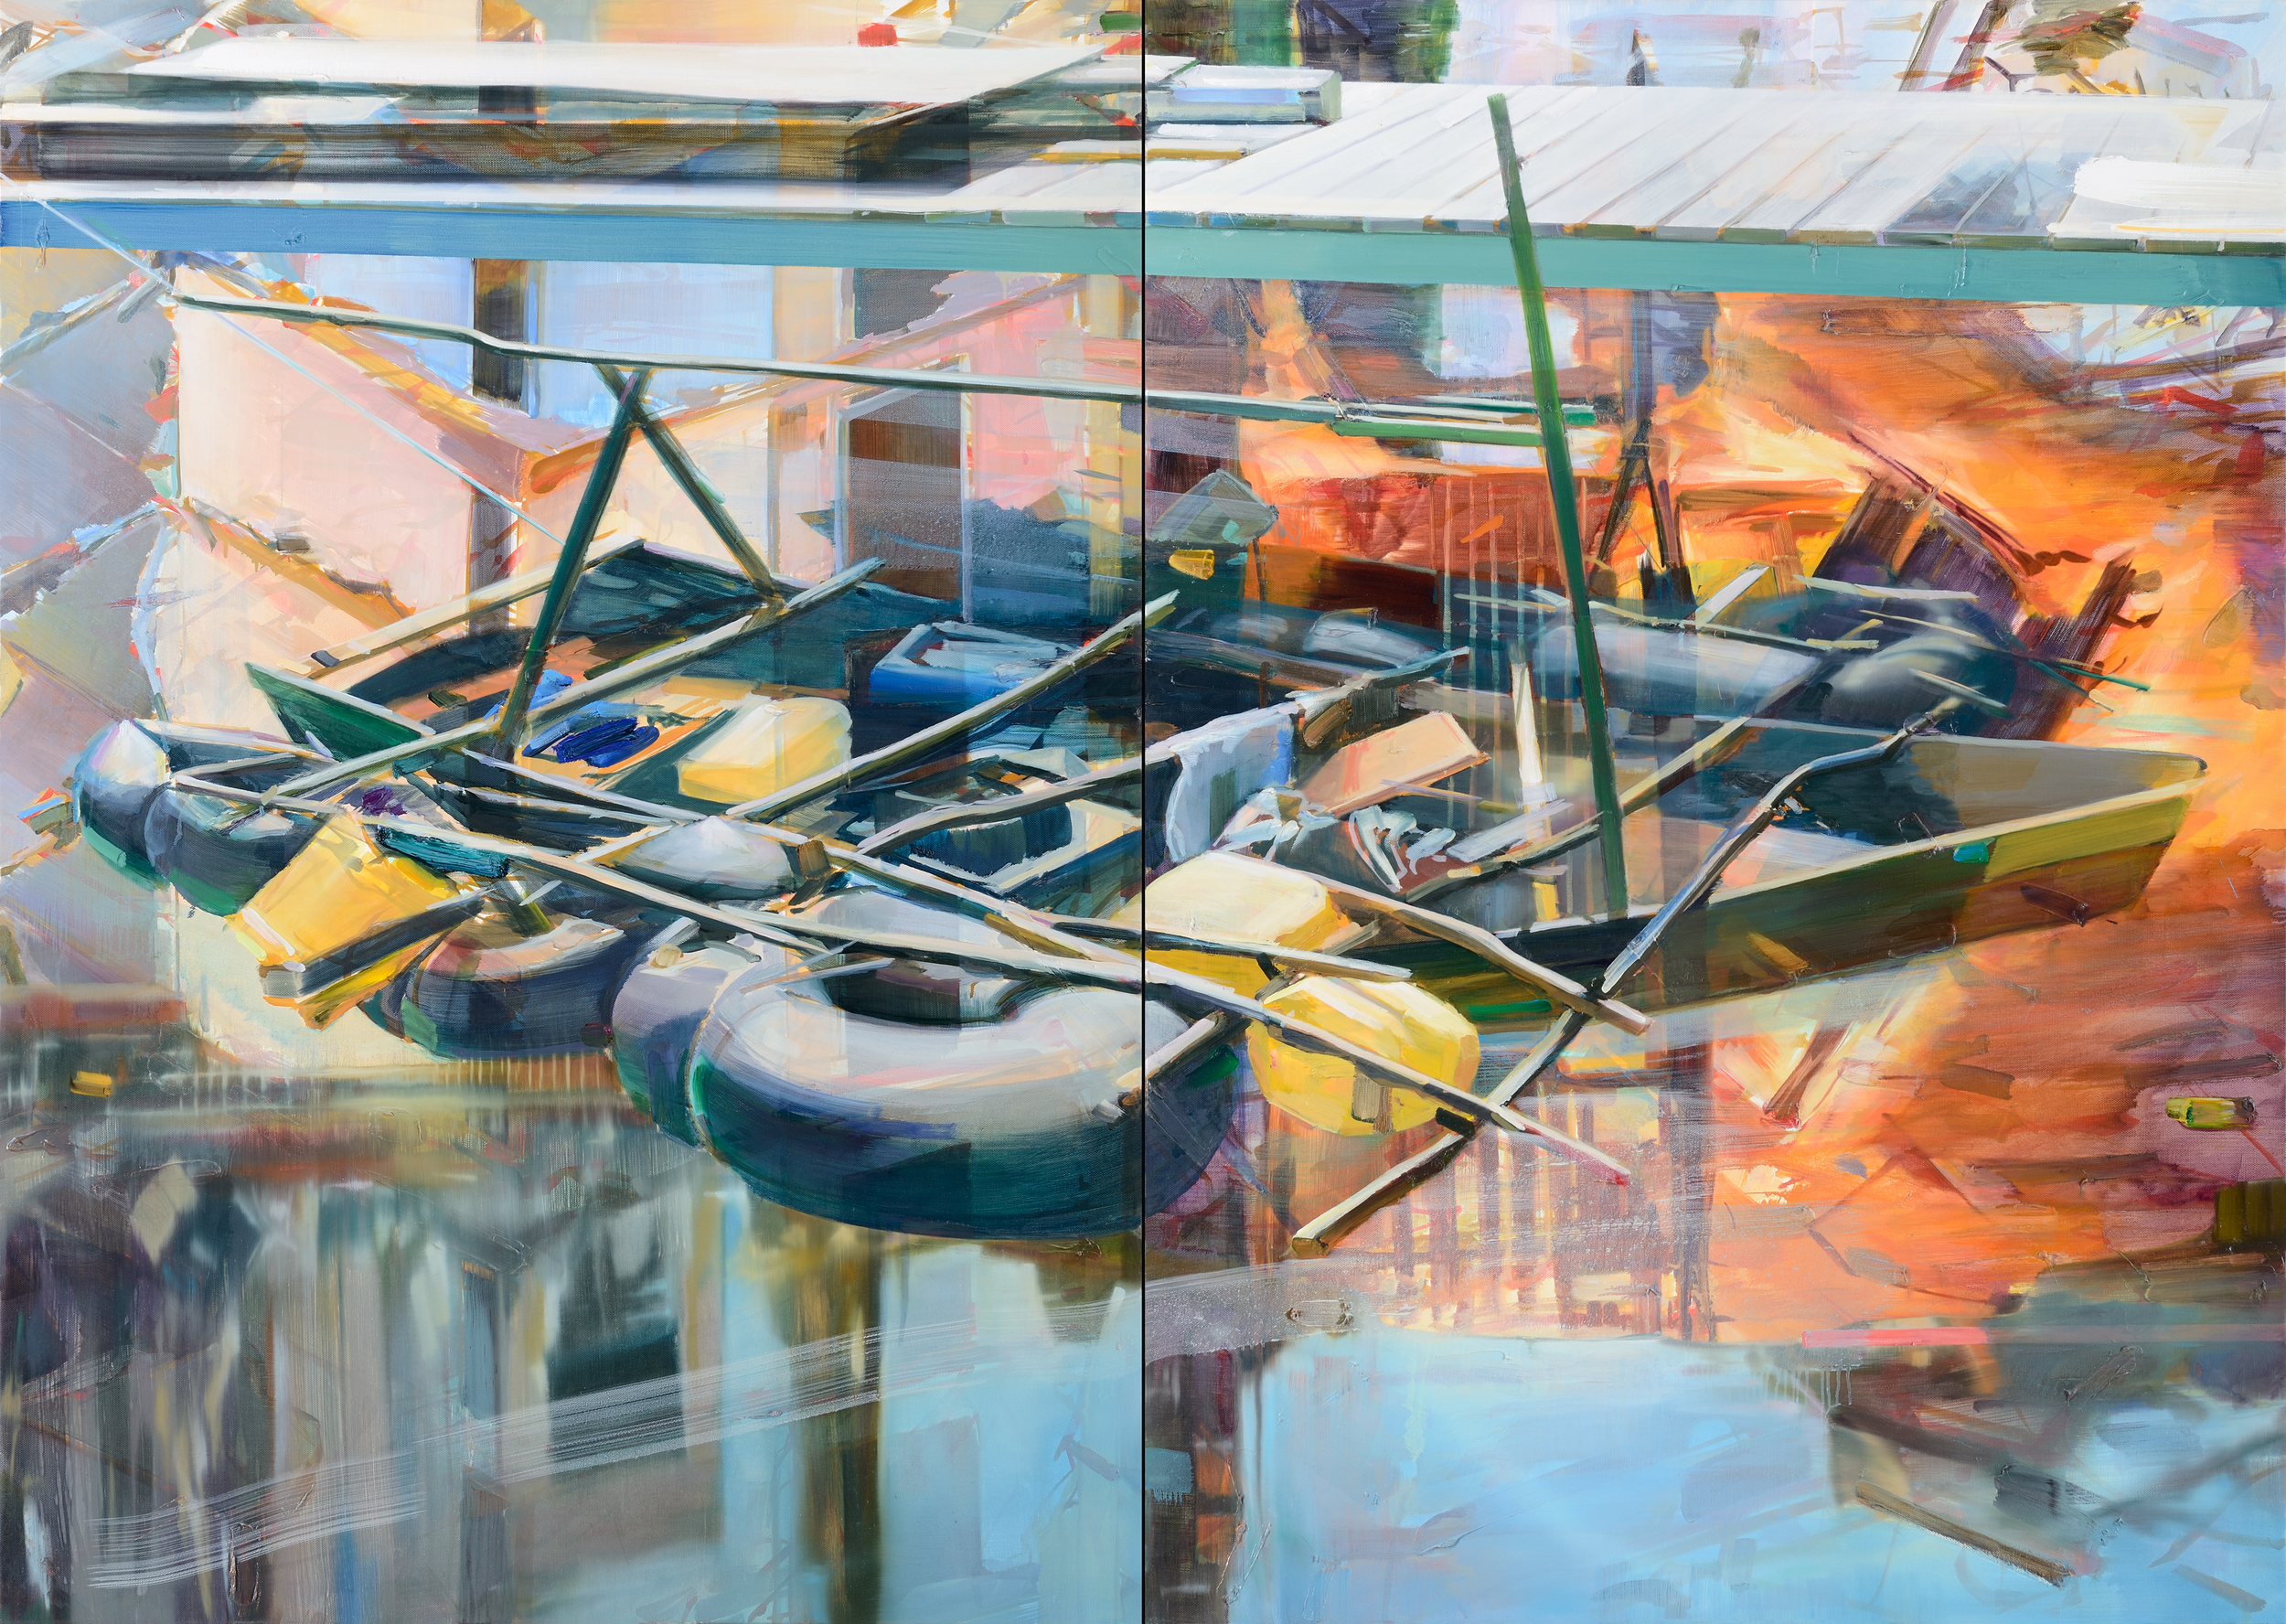   Sans titre (Mobile home) , 2012, oil on canvas, 162 x 228cm (diptych). MUDAM Collection, Luxembourg 